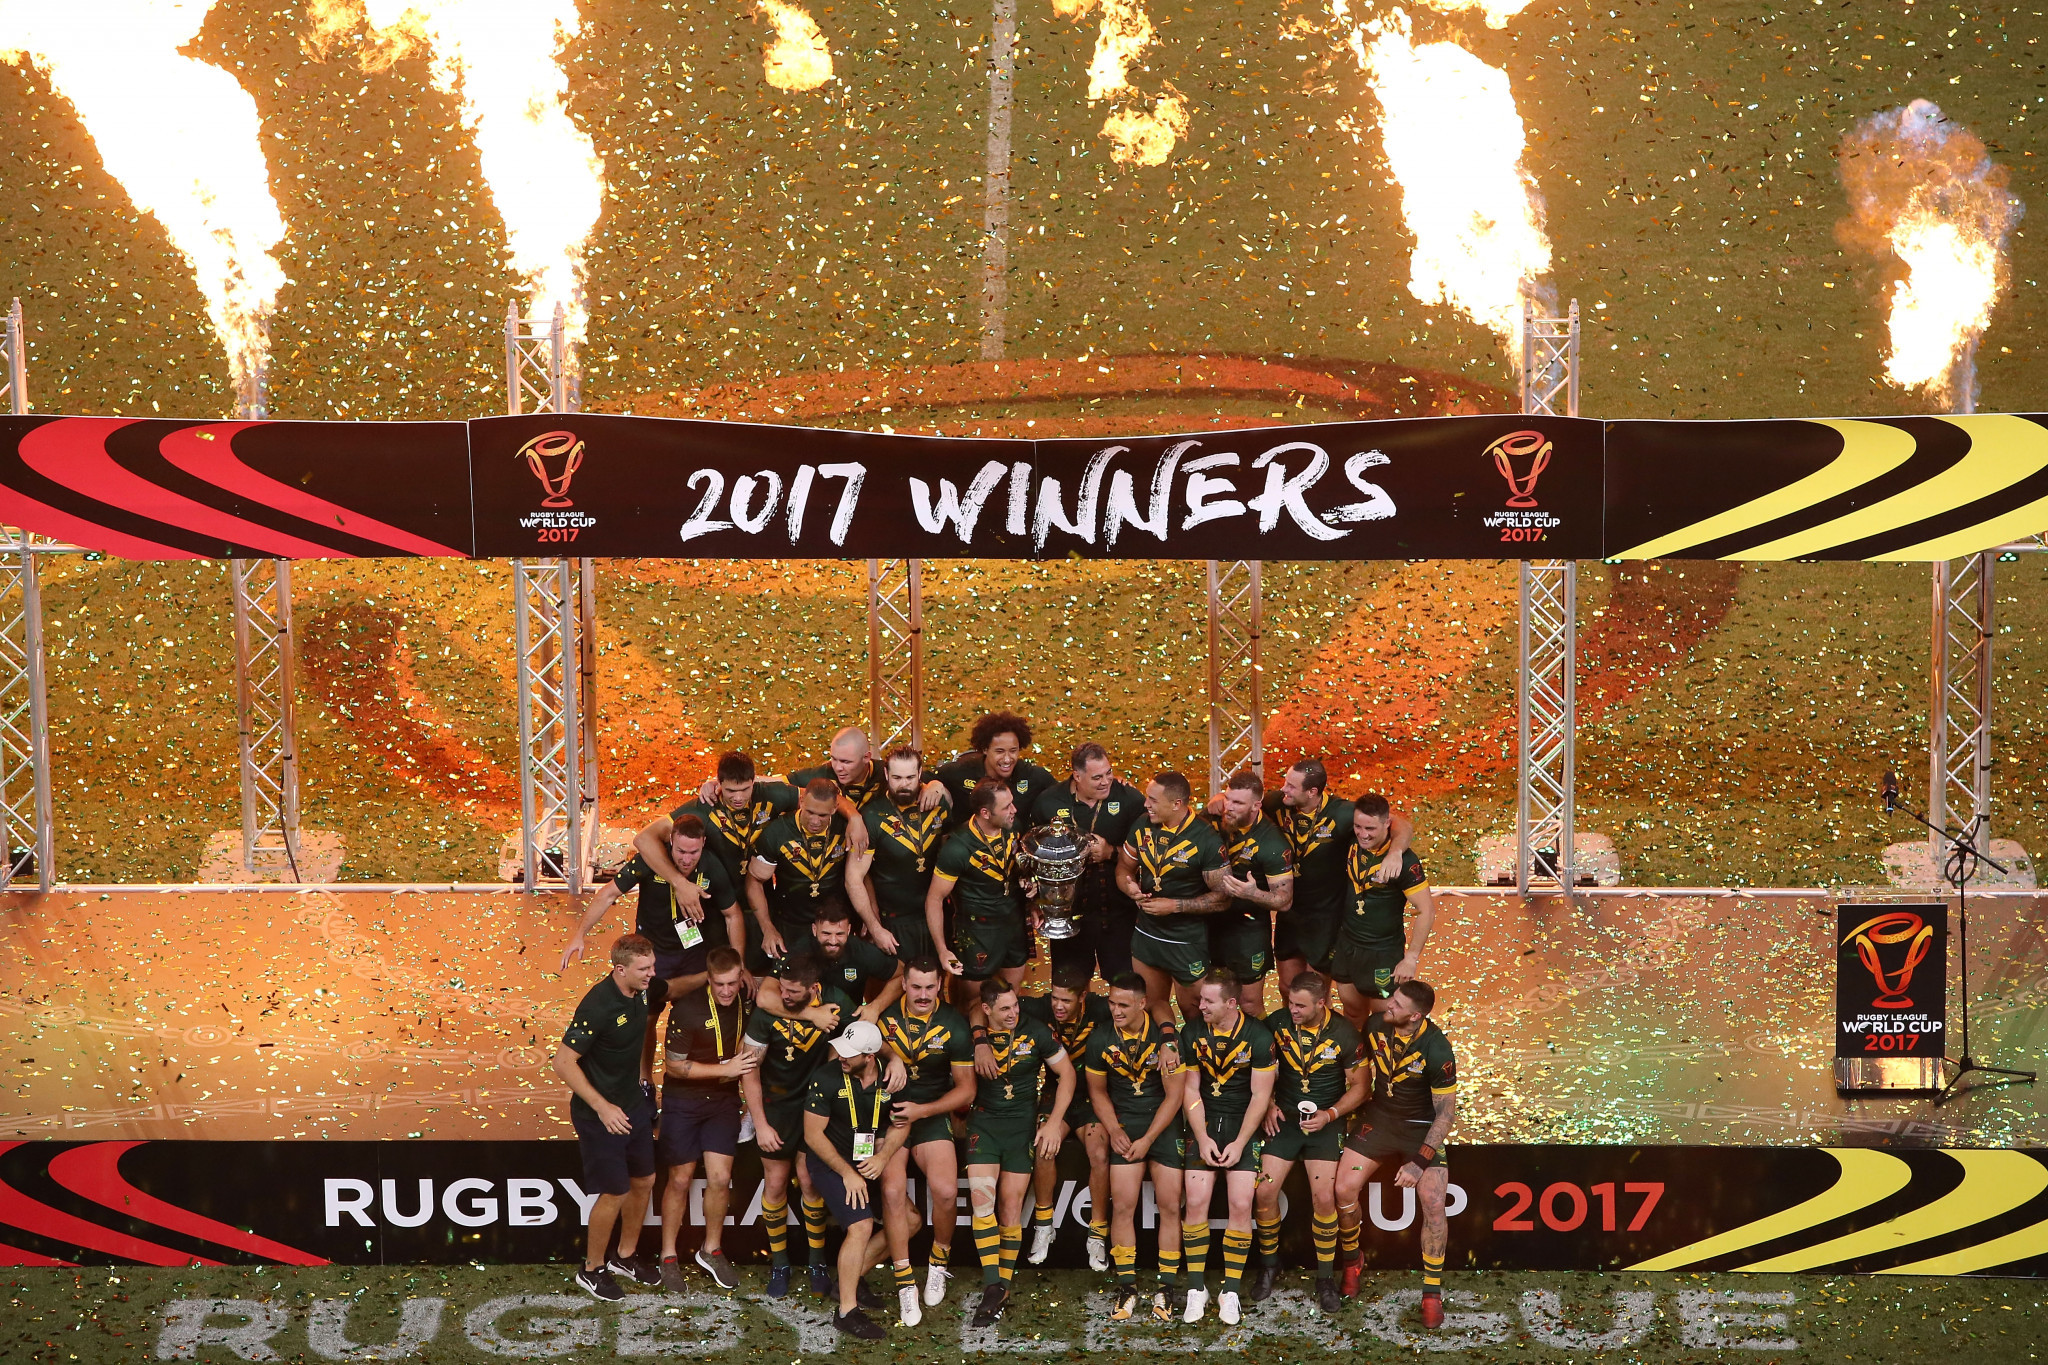 Rugby League World Cup postponed to 2022